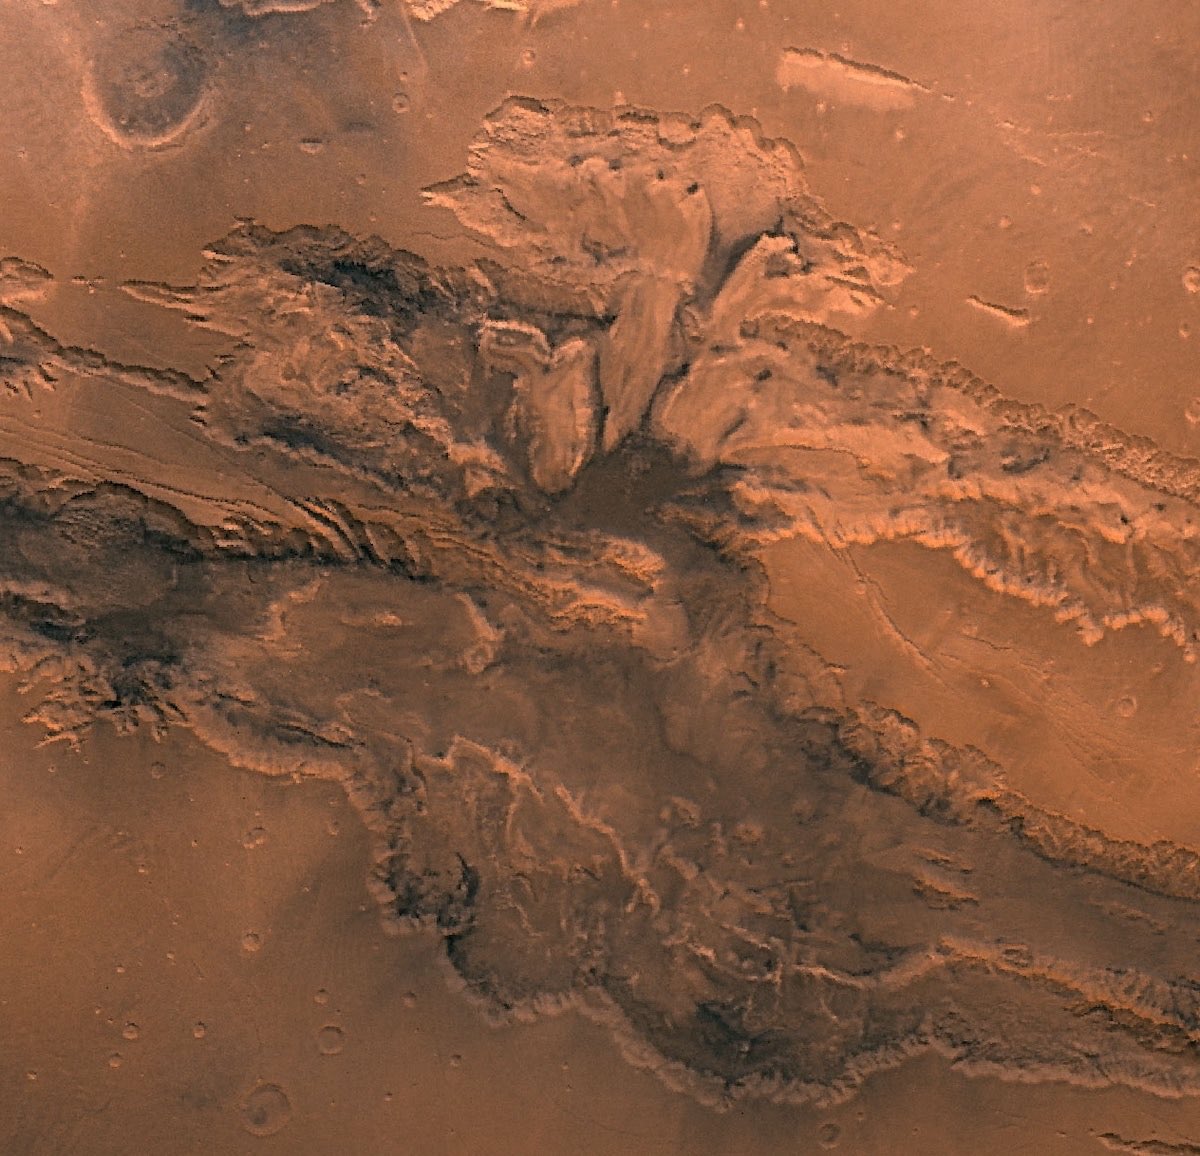 9. Valles Marineris is nearly 5 times deeper, 4 times longer and 20 times wider than the Grand Canyon! (10)